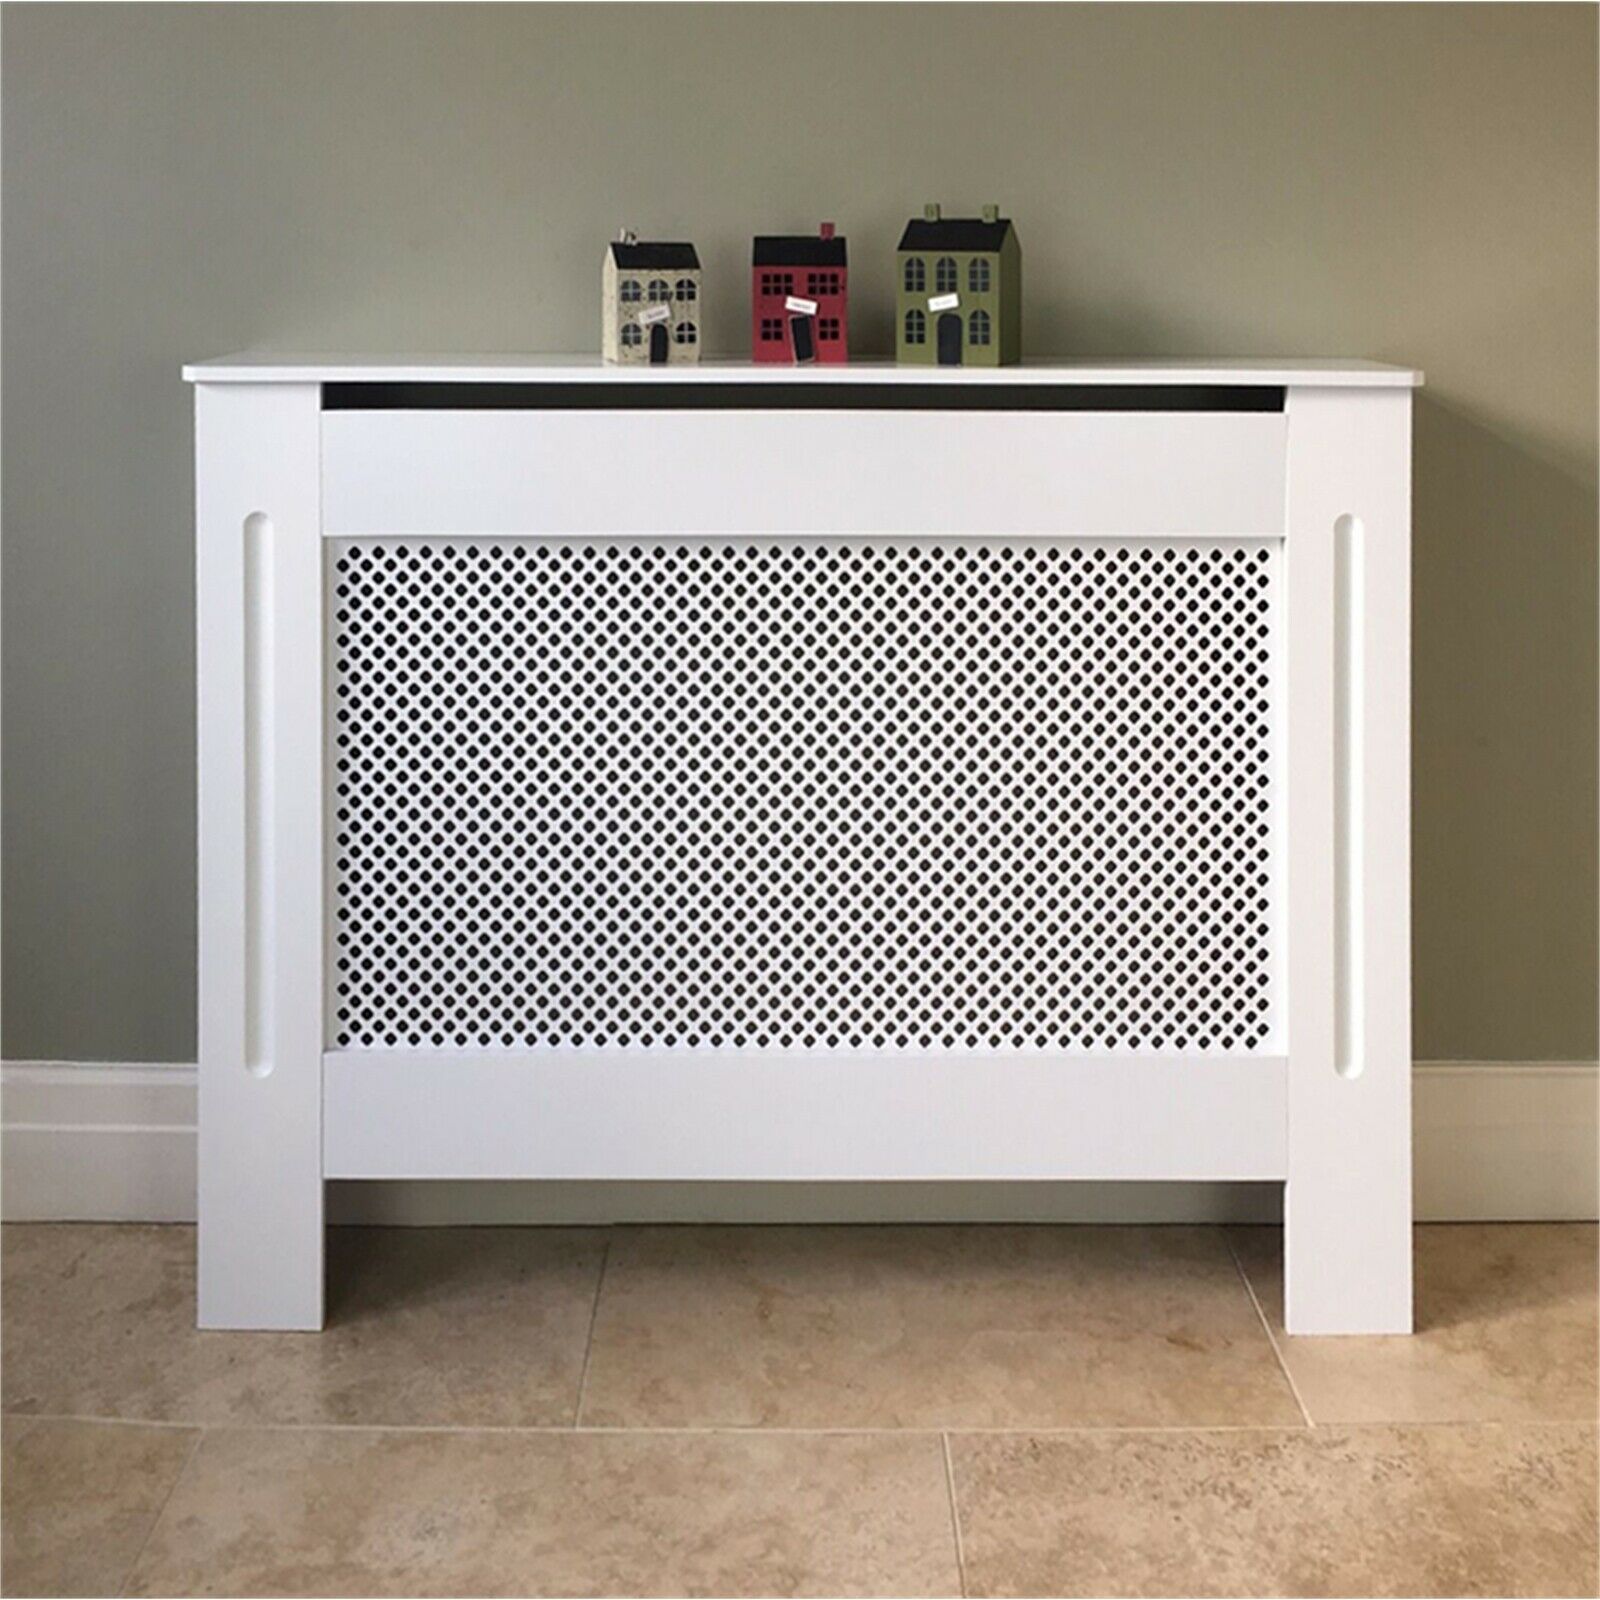 Chic Free Standing White Wooden Mdf Radiator Heater Cover Regarding Radiator Cover Tv Stands (View 8 of 15)